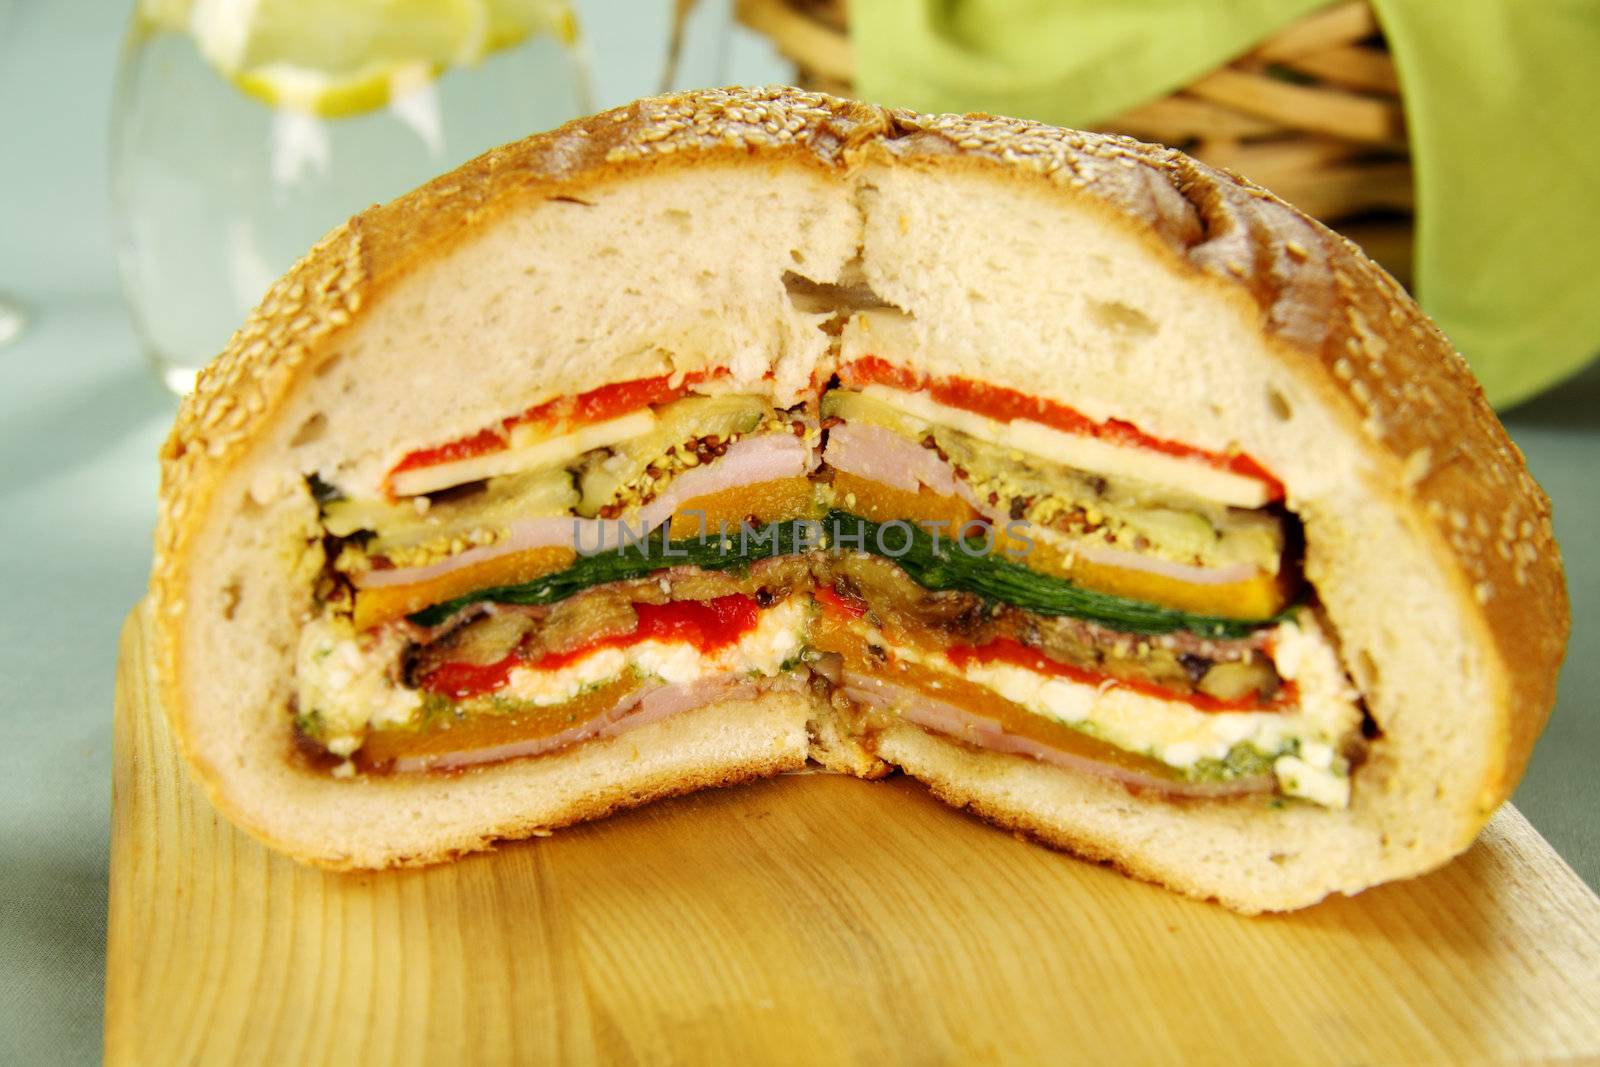 Delicious savory cob loaf filled with ham, salami, aubergine, cottage cheese and vegetables.